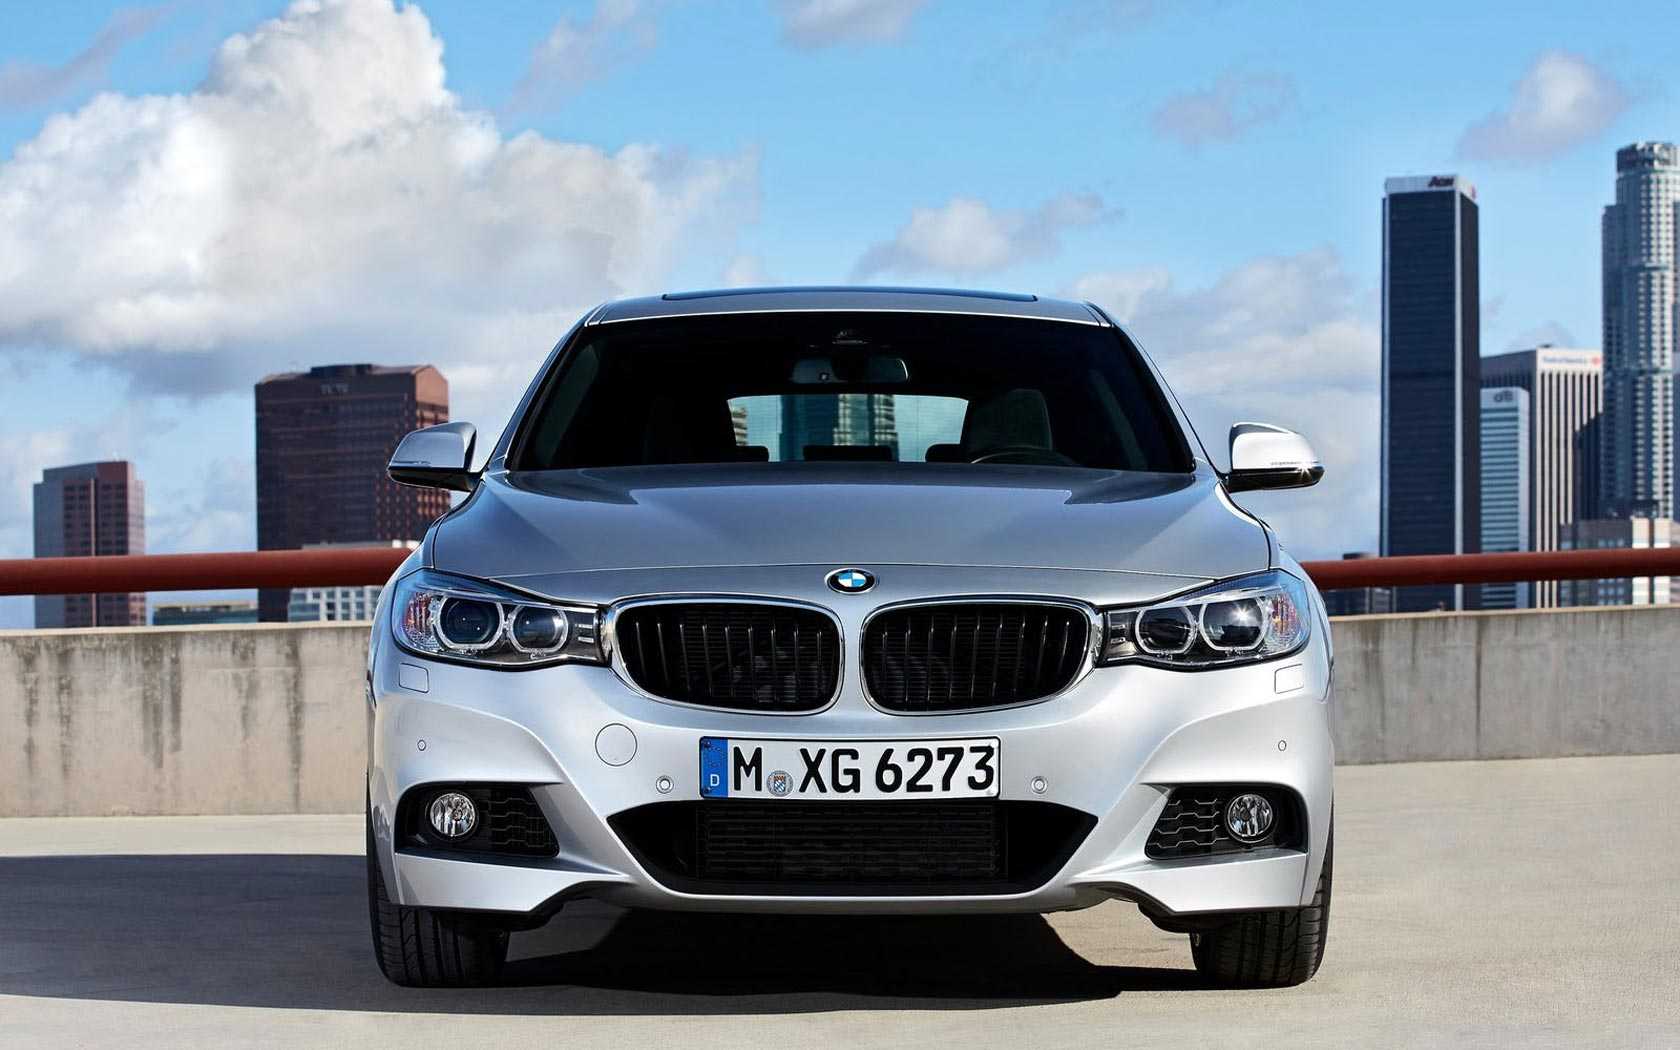 The new bmw 3 series touring: engines & technical data